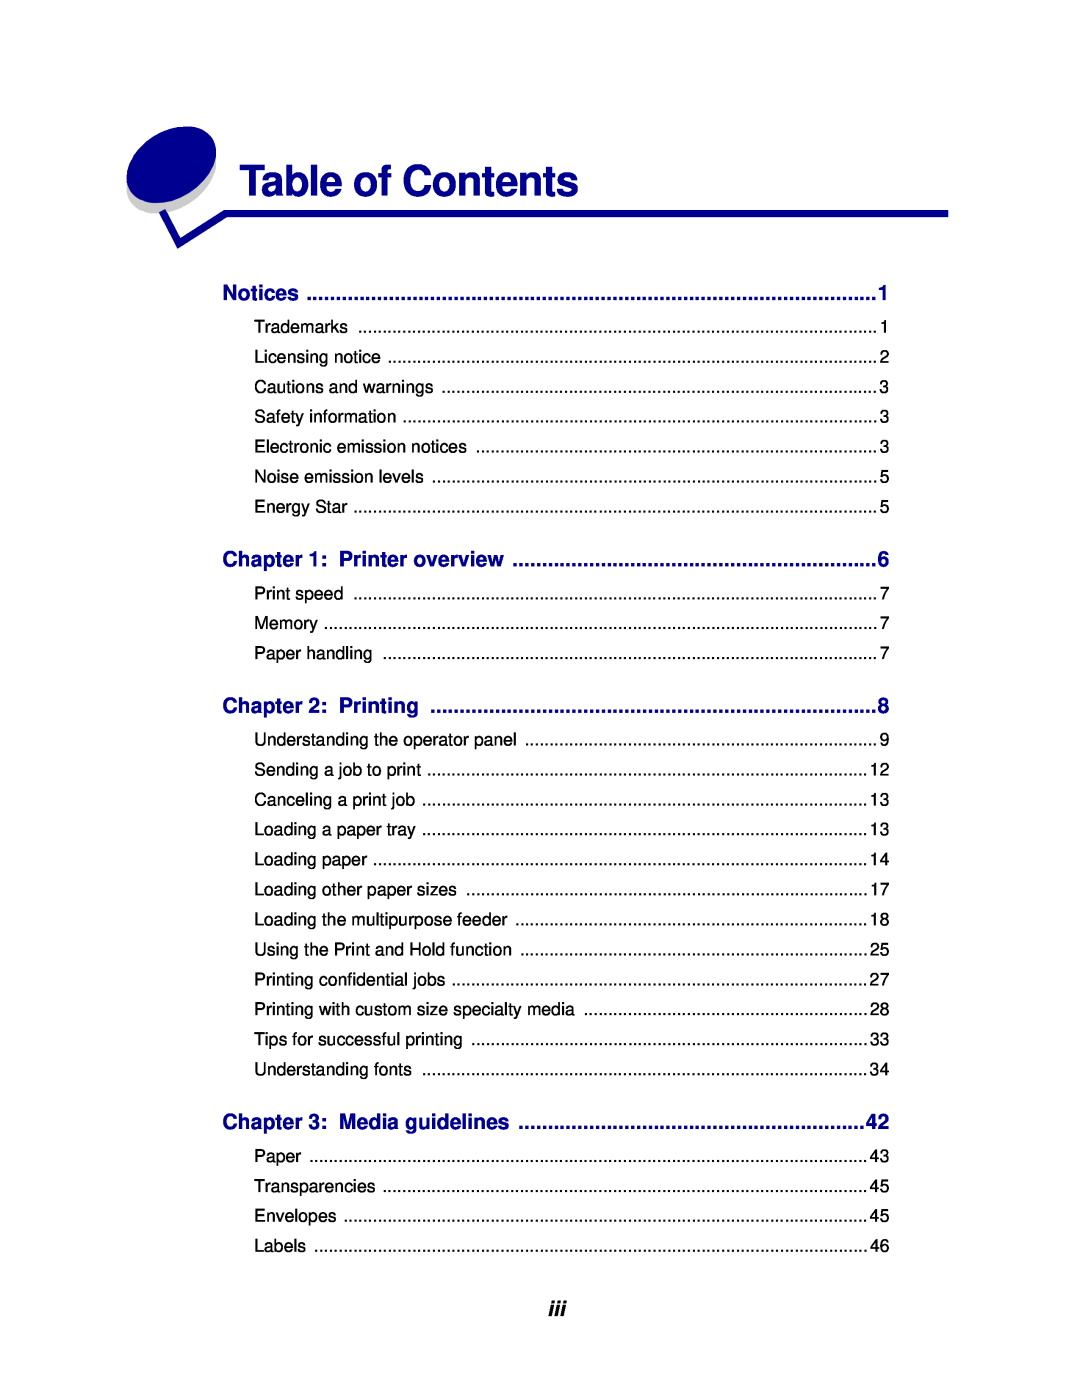 Lexmark 912 manual Table of Contents, Notices, Printer overview, Printing, Media guidelines 